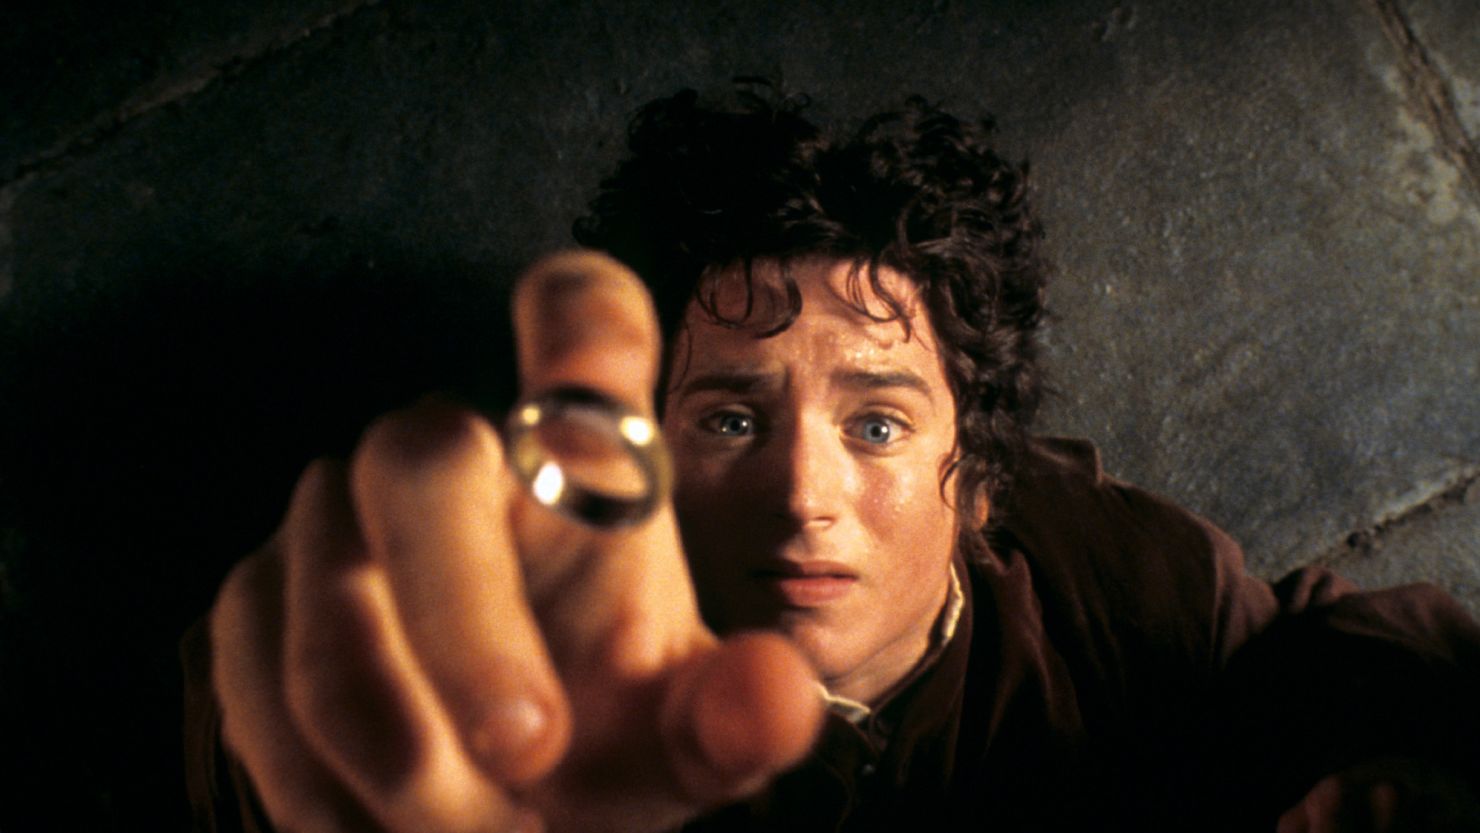 New 'Lord of the Rings' movie series in the works at Warner Bros.